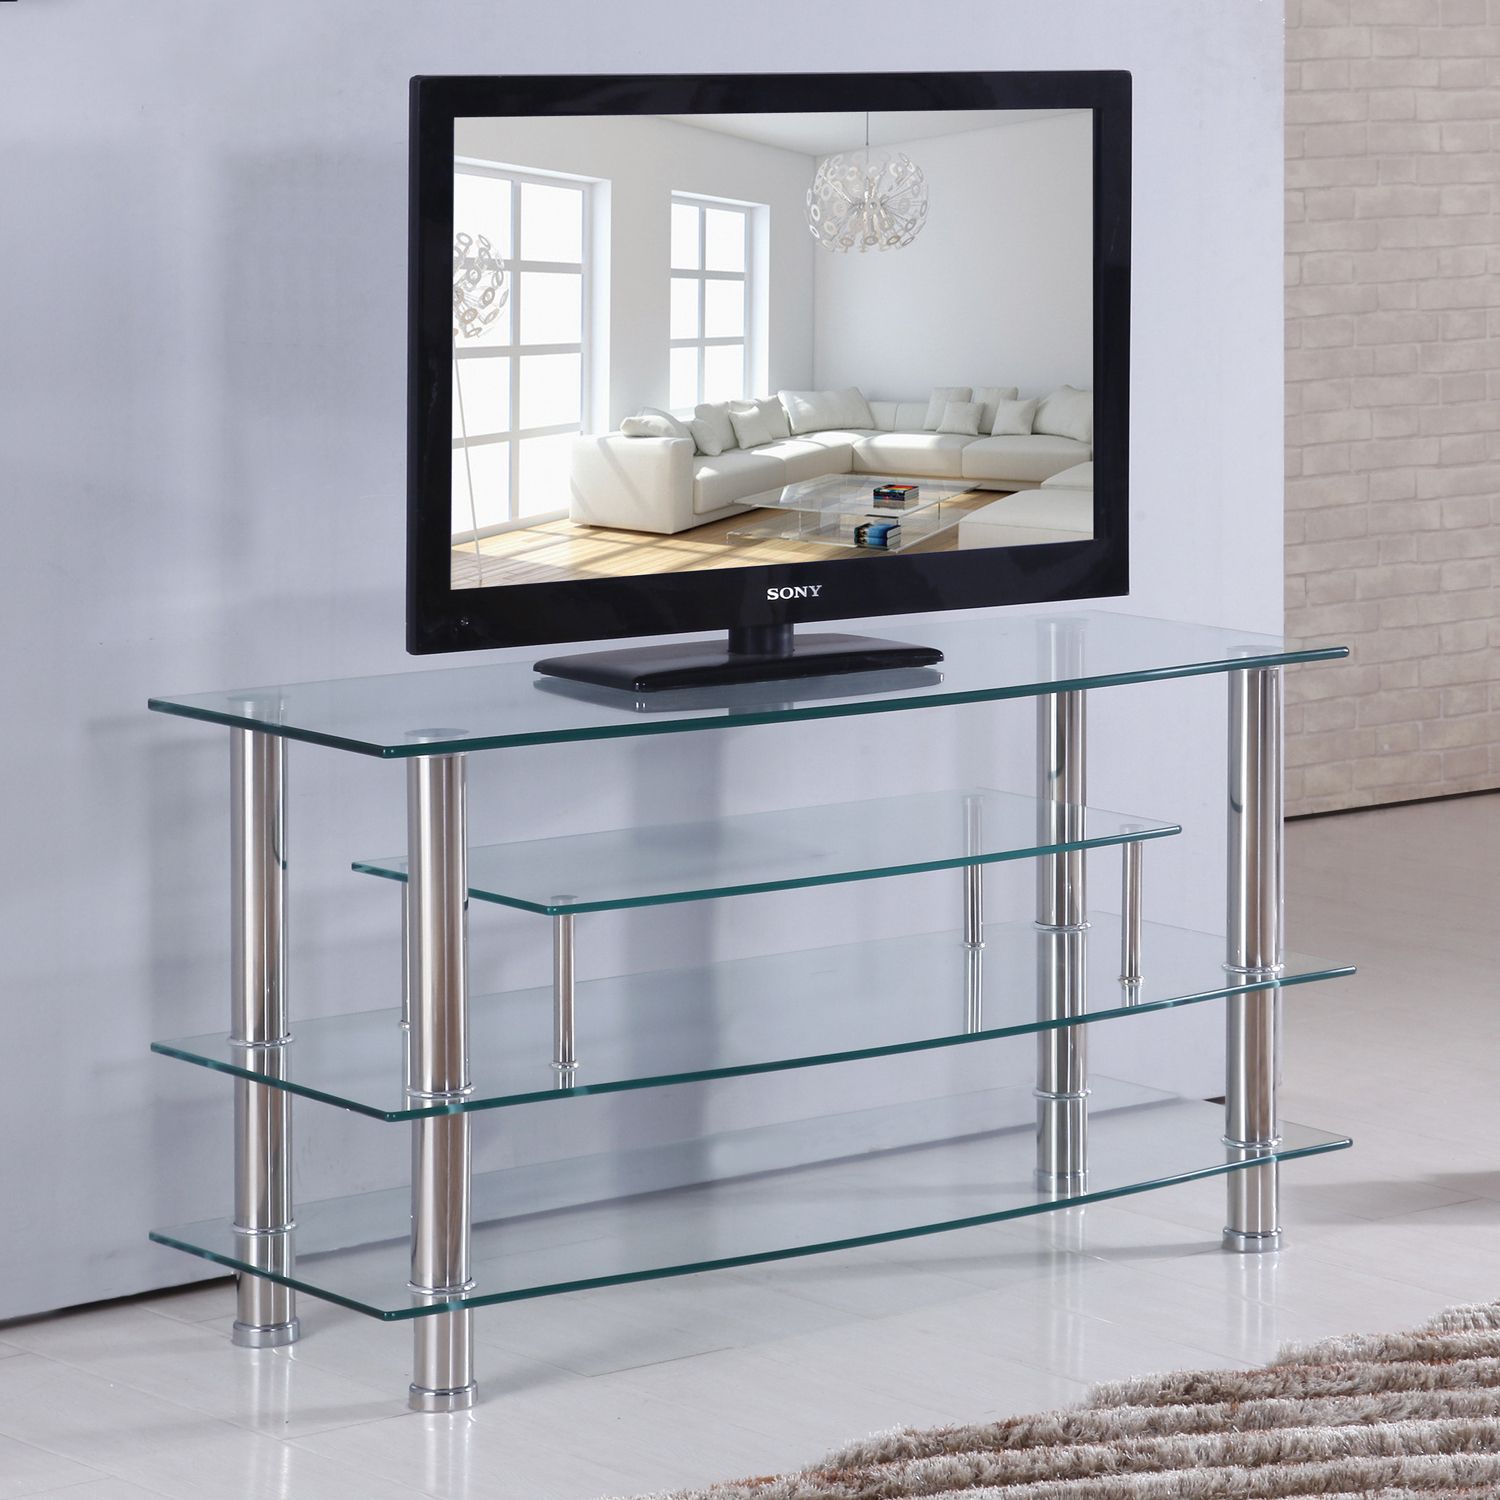 Home Source Hunter Plasma Tv Stand With 4 Clear Glass Within Tv Mounts And Shelves (View 4 of 15)